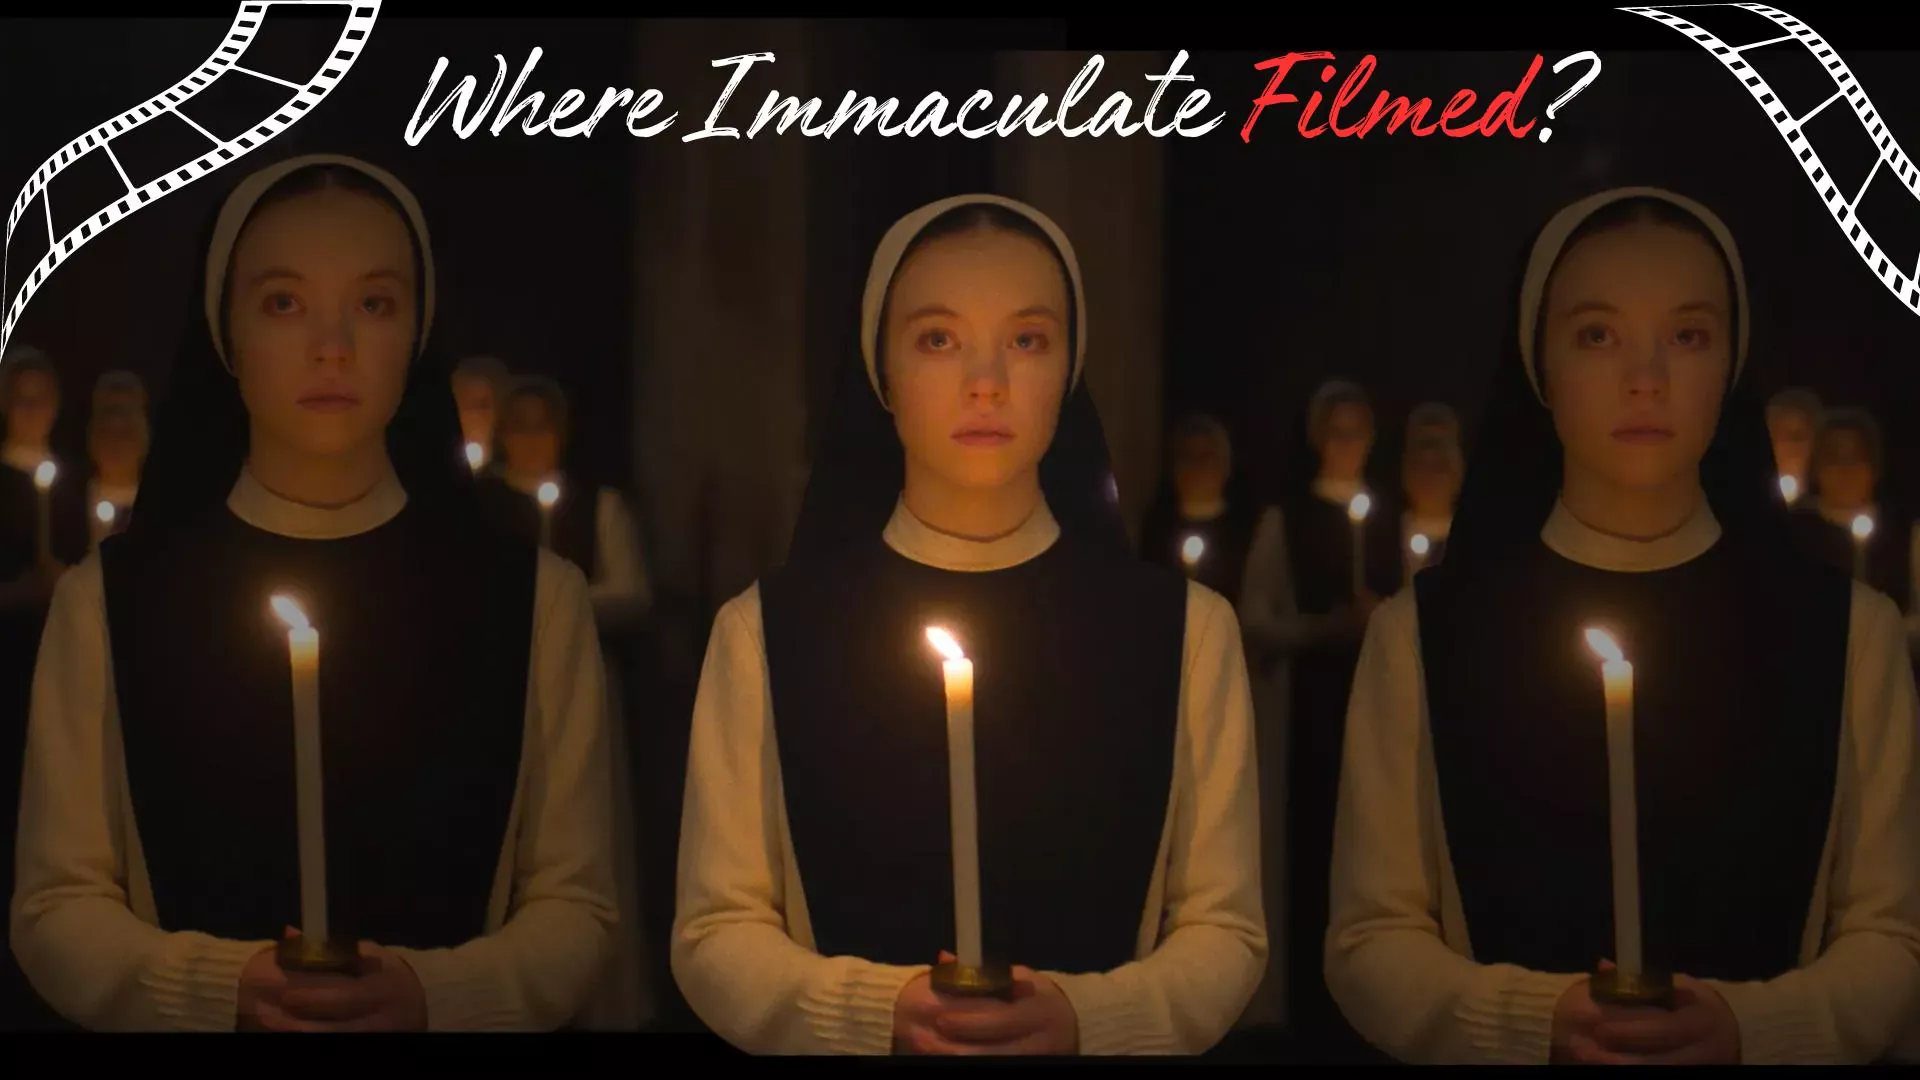 Discover Real Life Locations Where Immaculate Filmed